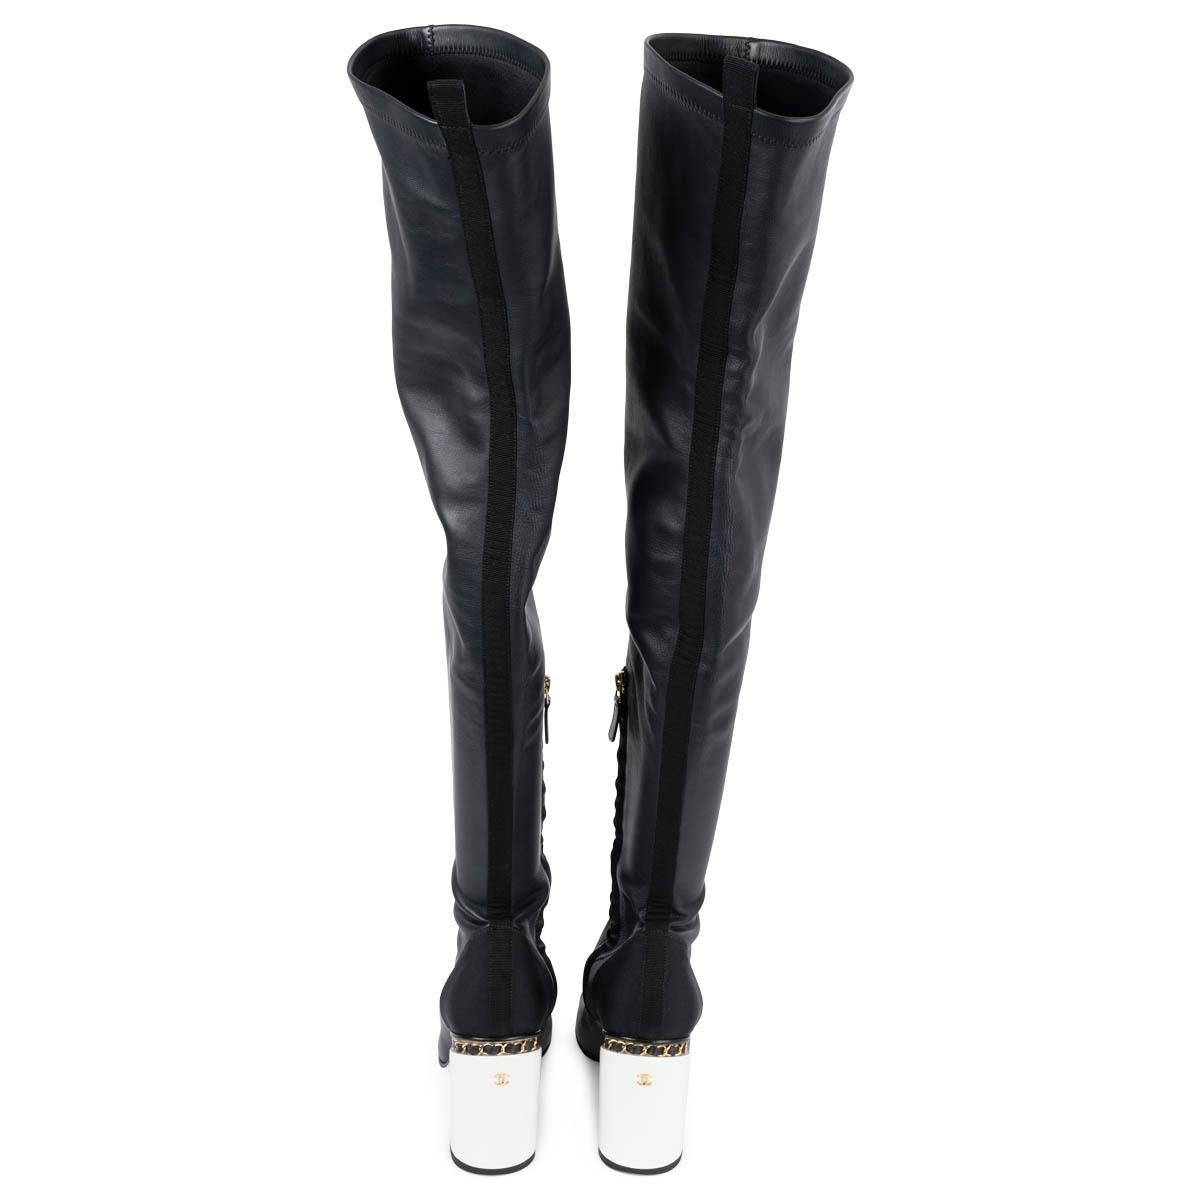 Women's CHANEL black leather 2016 16B CHAIN BLOCK HEEL OVER KNEE Boots Shoes 39